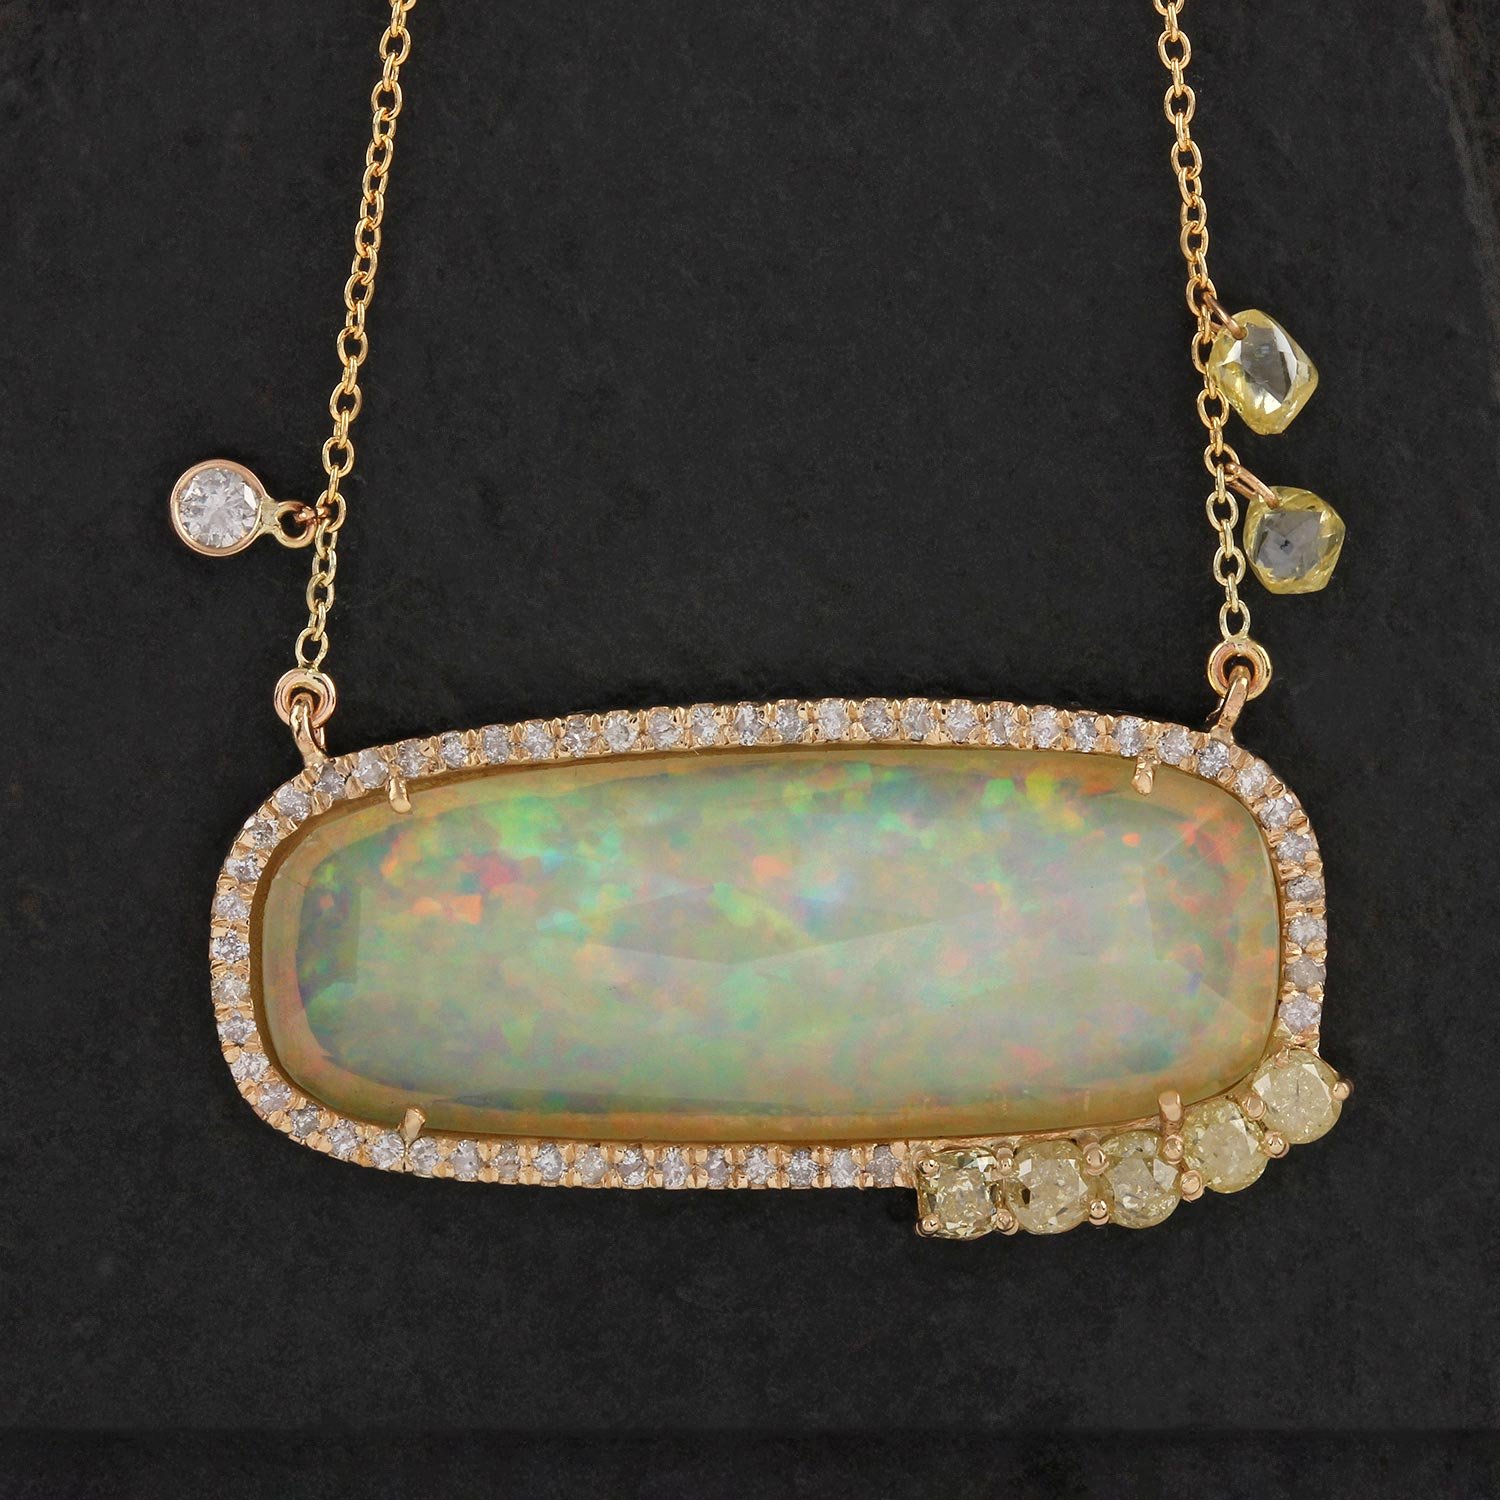 Opal Gemstone Pave Diamond Pendant Chain Necklace 14K Solid Gold Jewelry